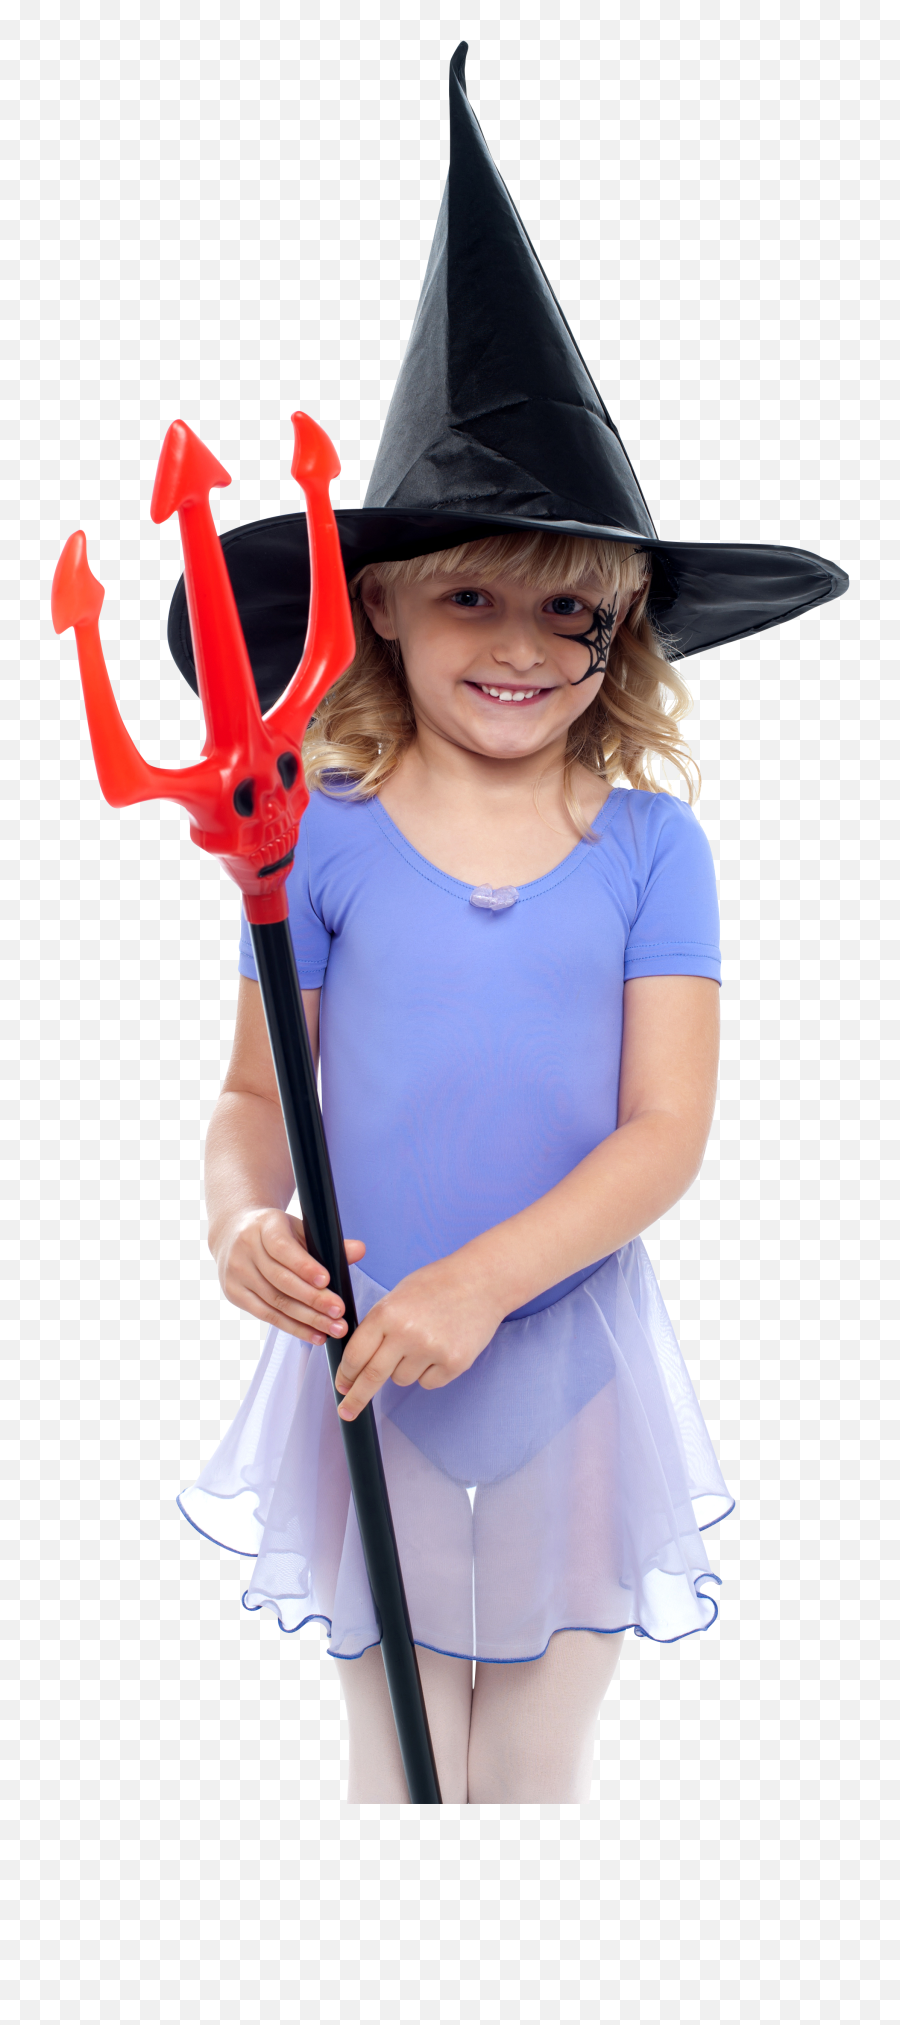 Child Girl Png Images Transparent Background Play - Kid Girl In Halloween Costume Transparent Background,Witch Hat Transparent Background